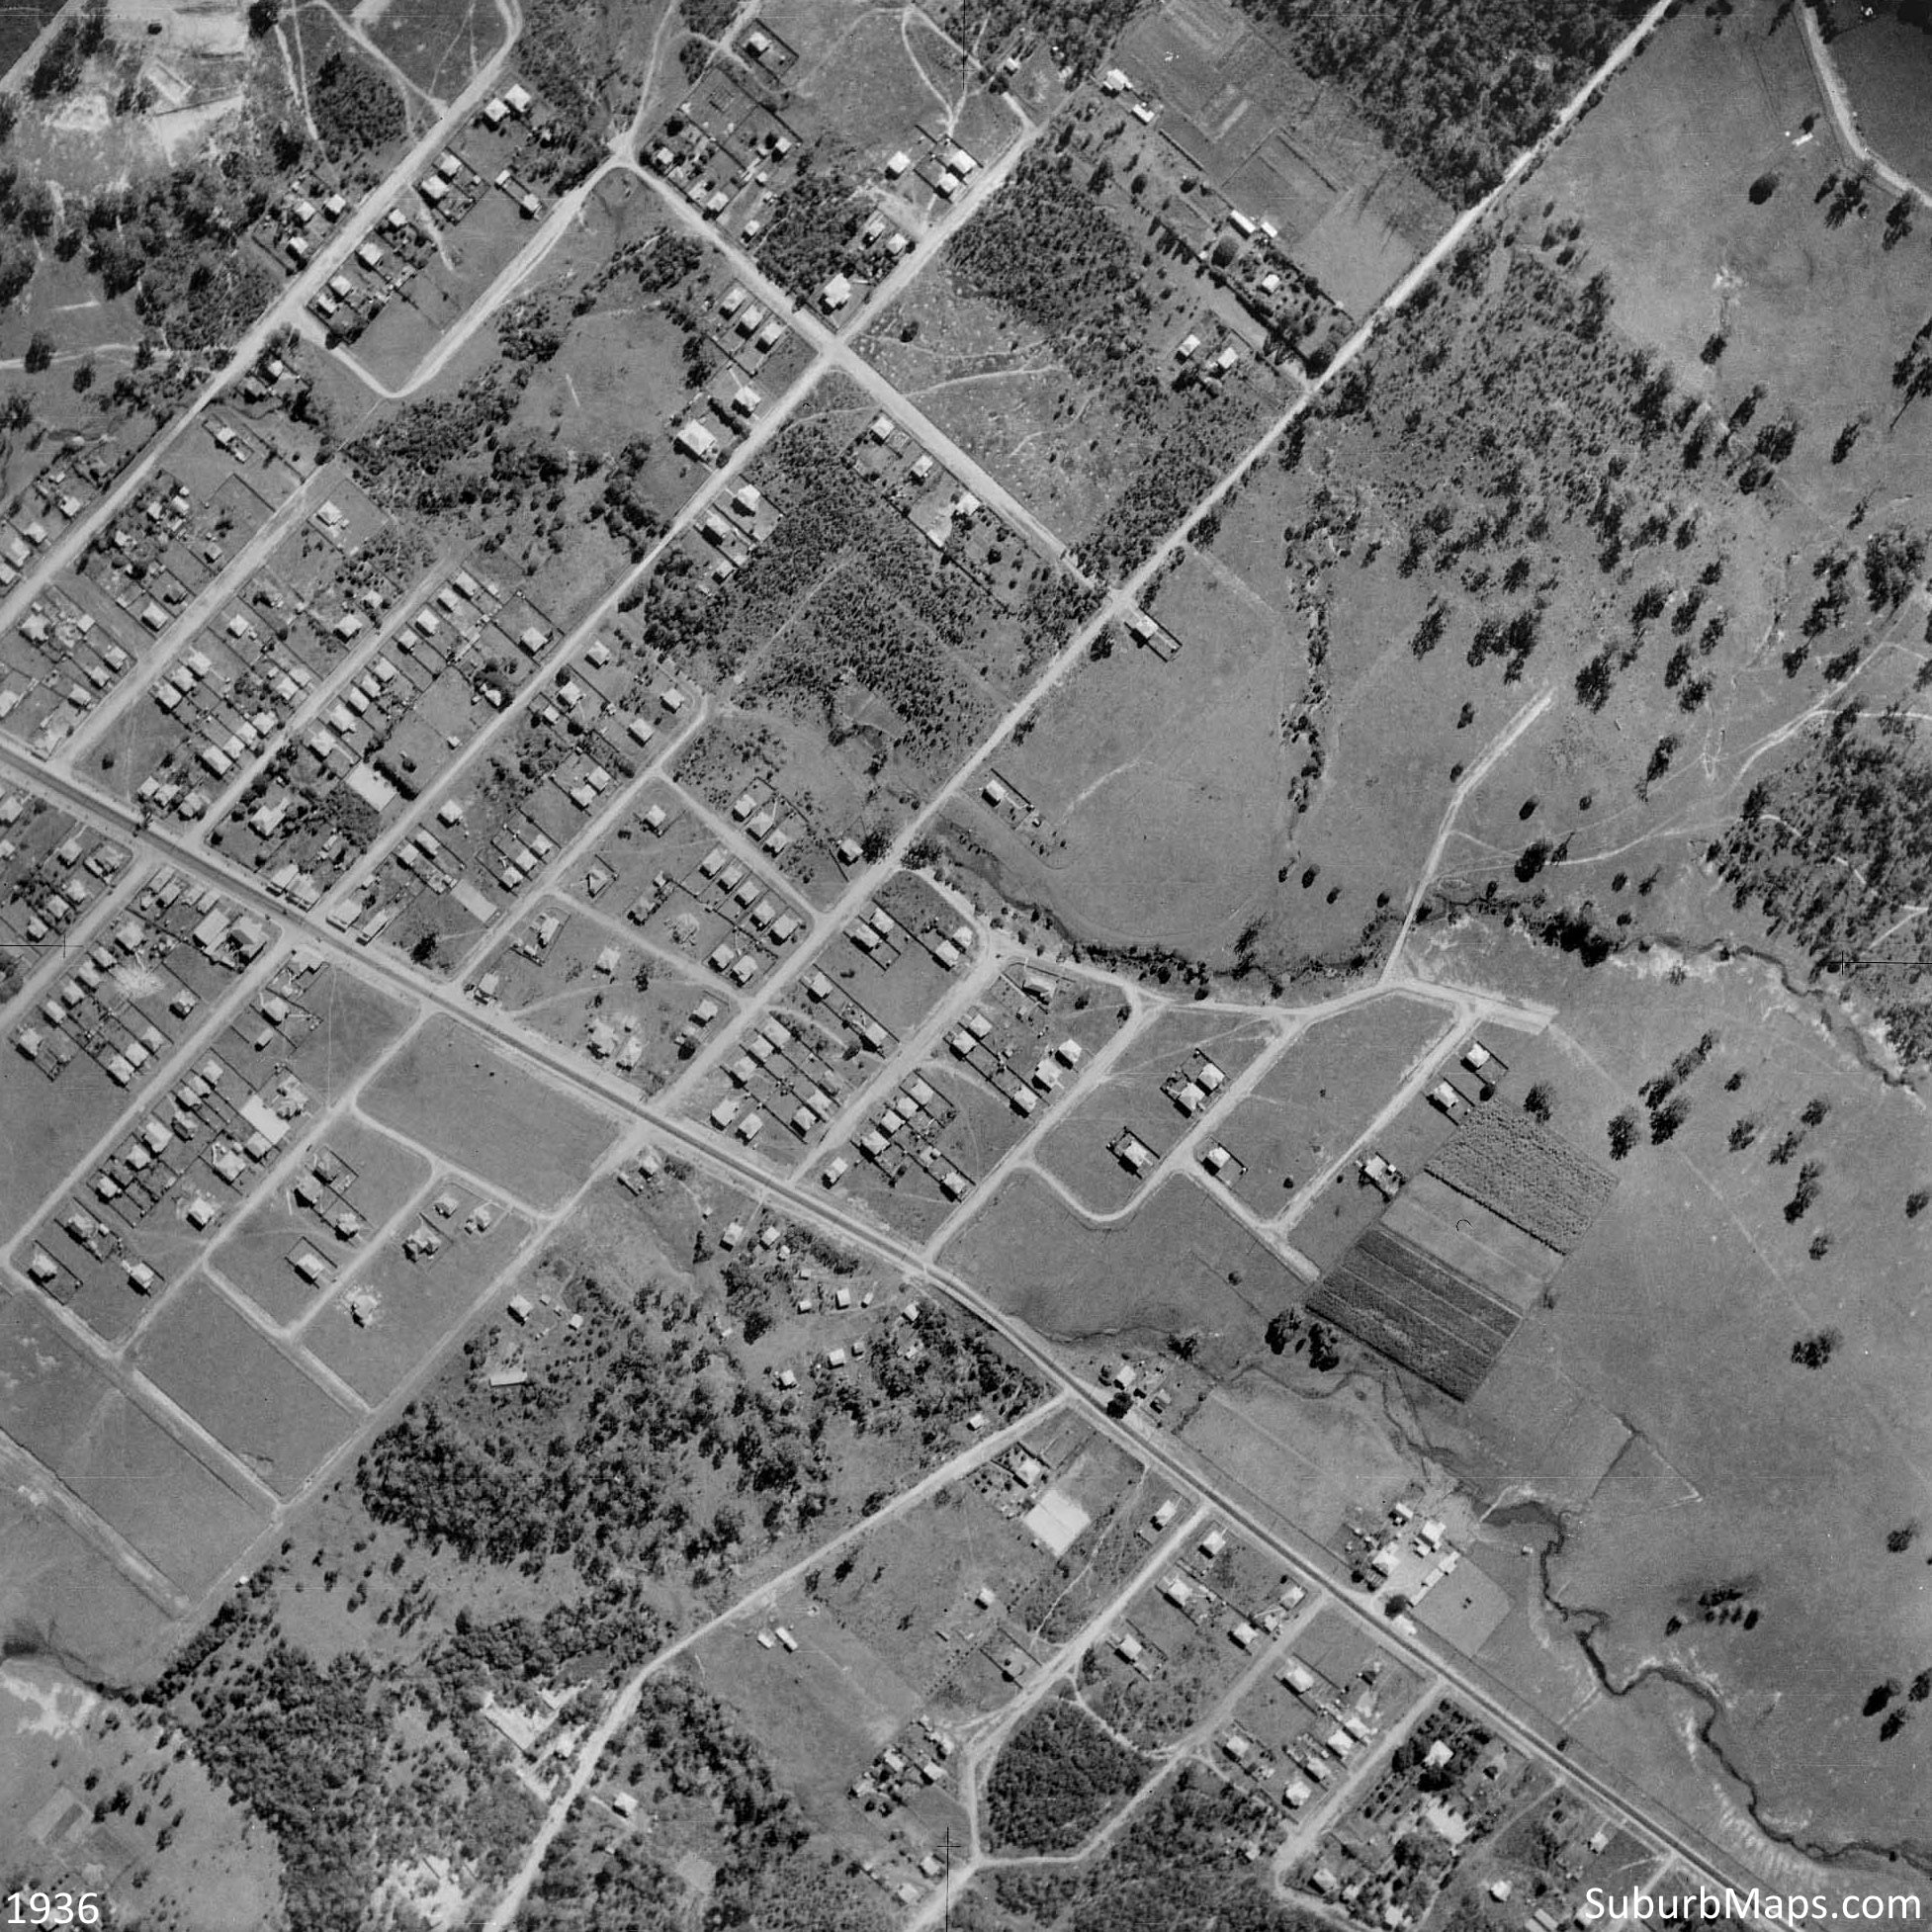 1936 Aerial Photo of the Holland Park area